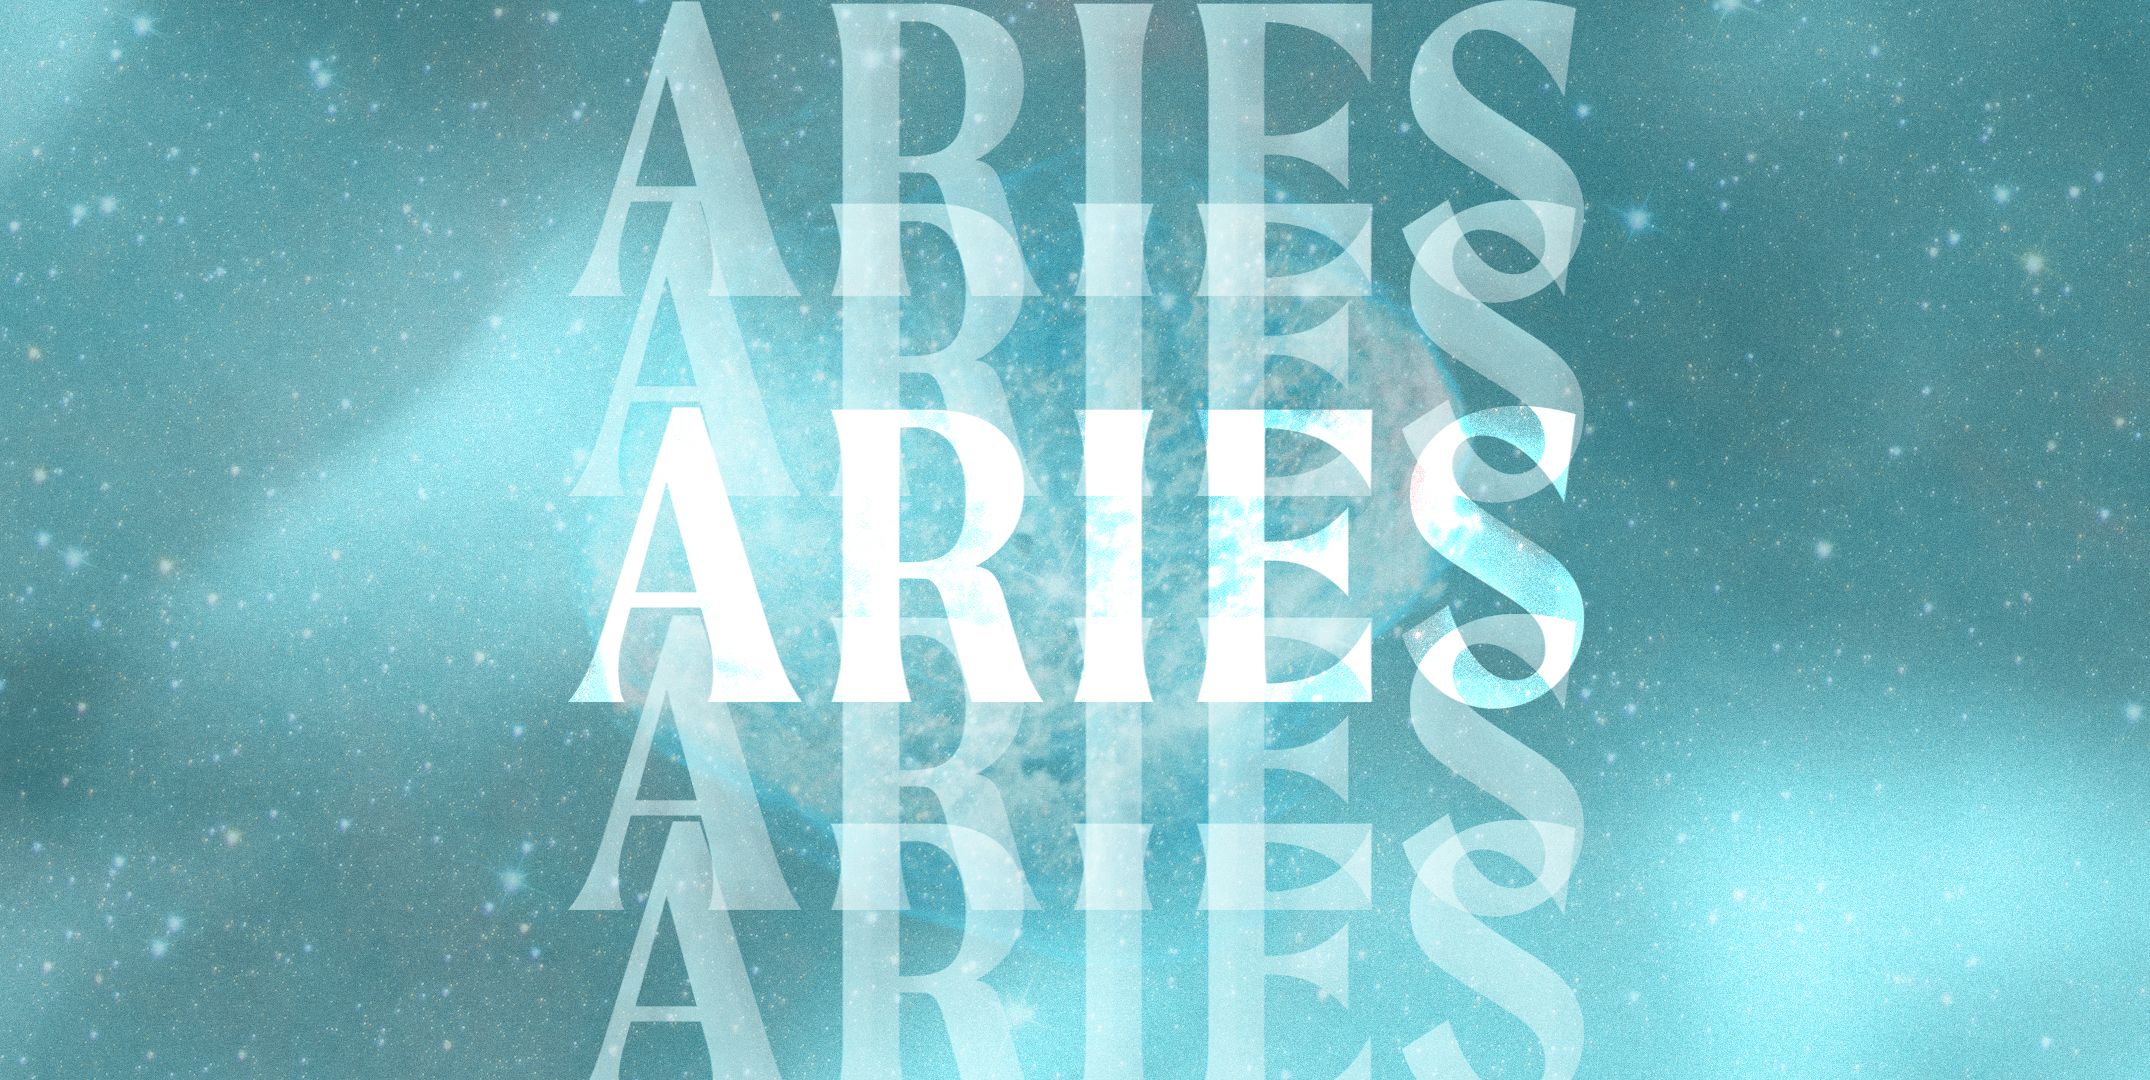 Aries star sign traits, personality and characteristics